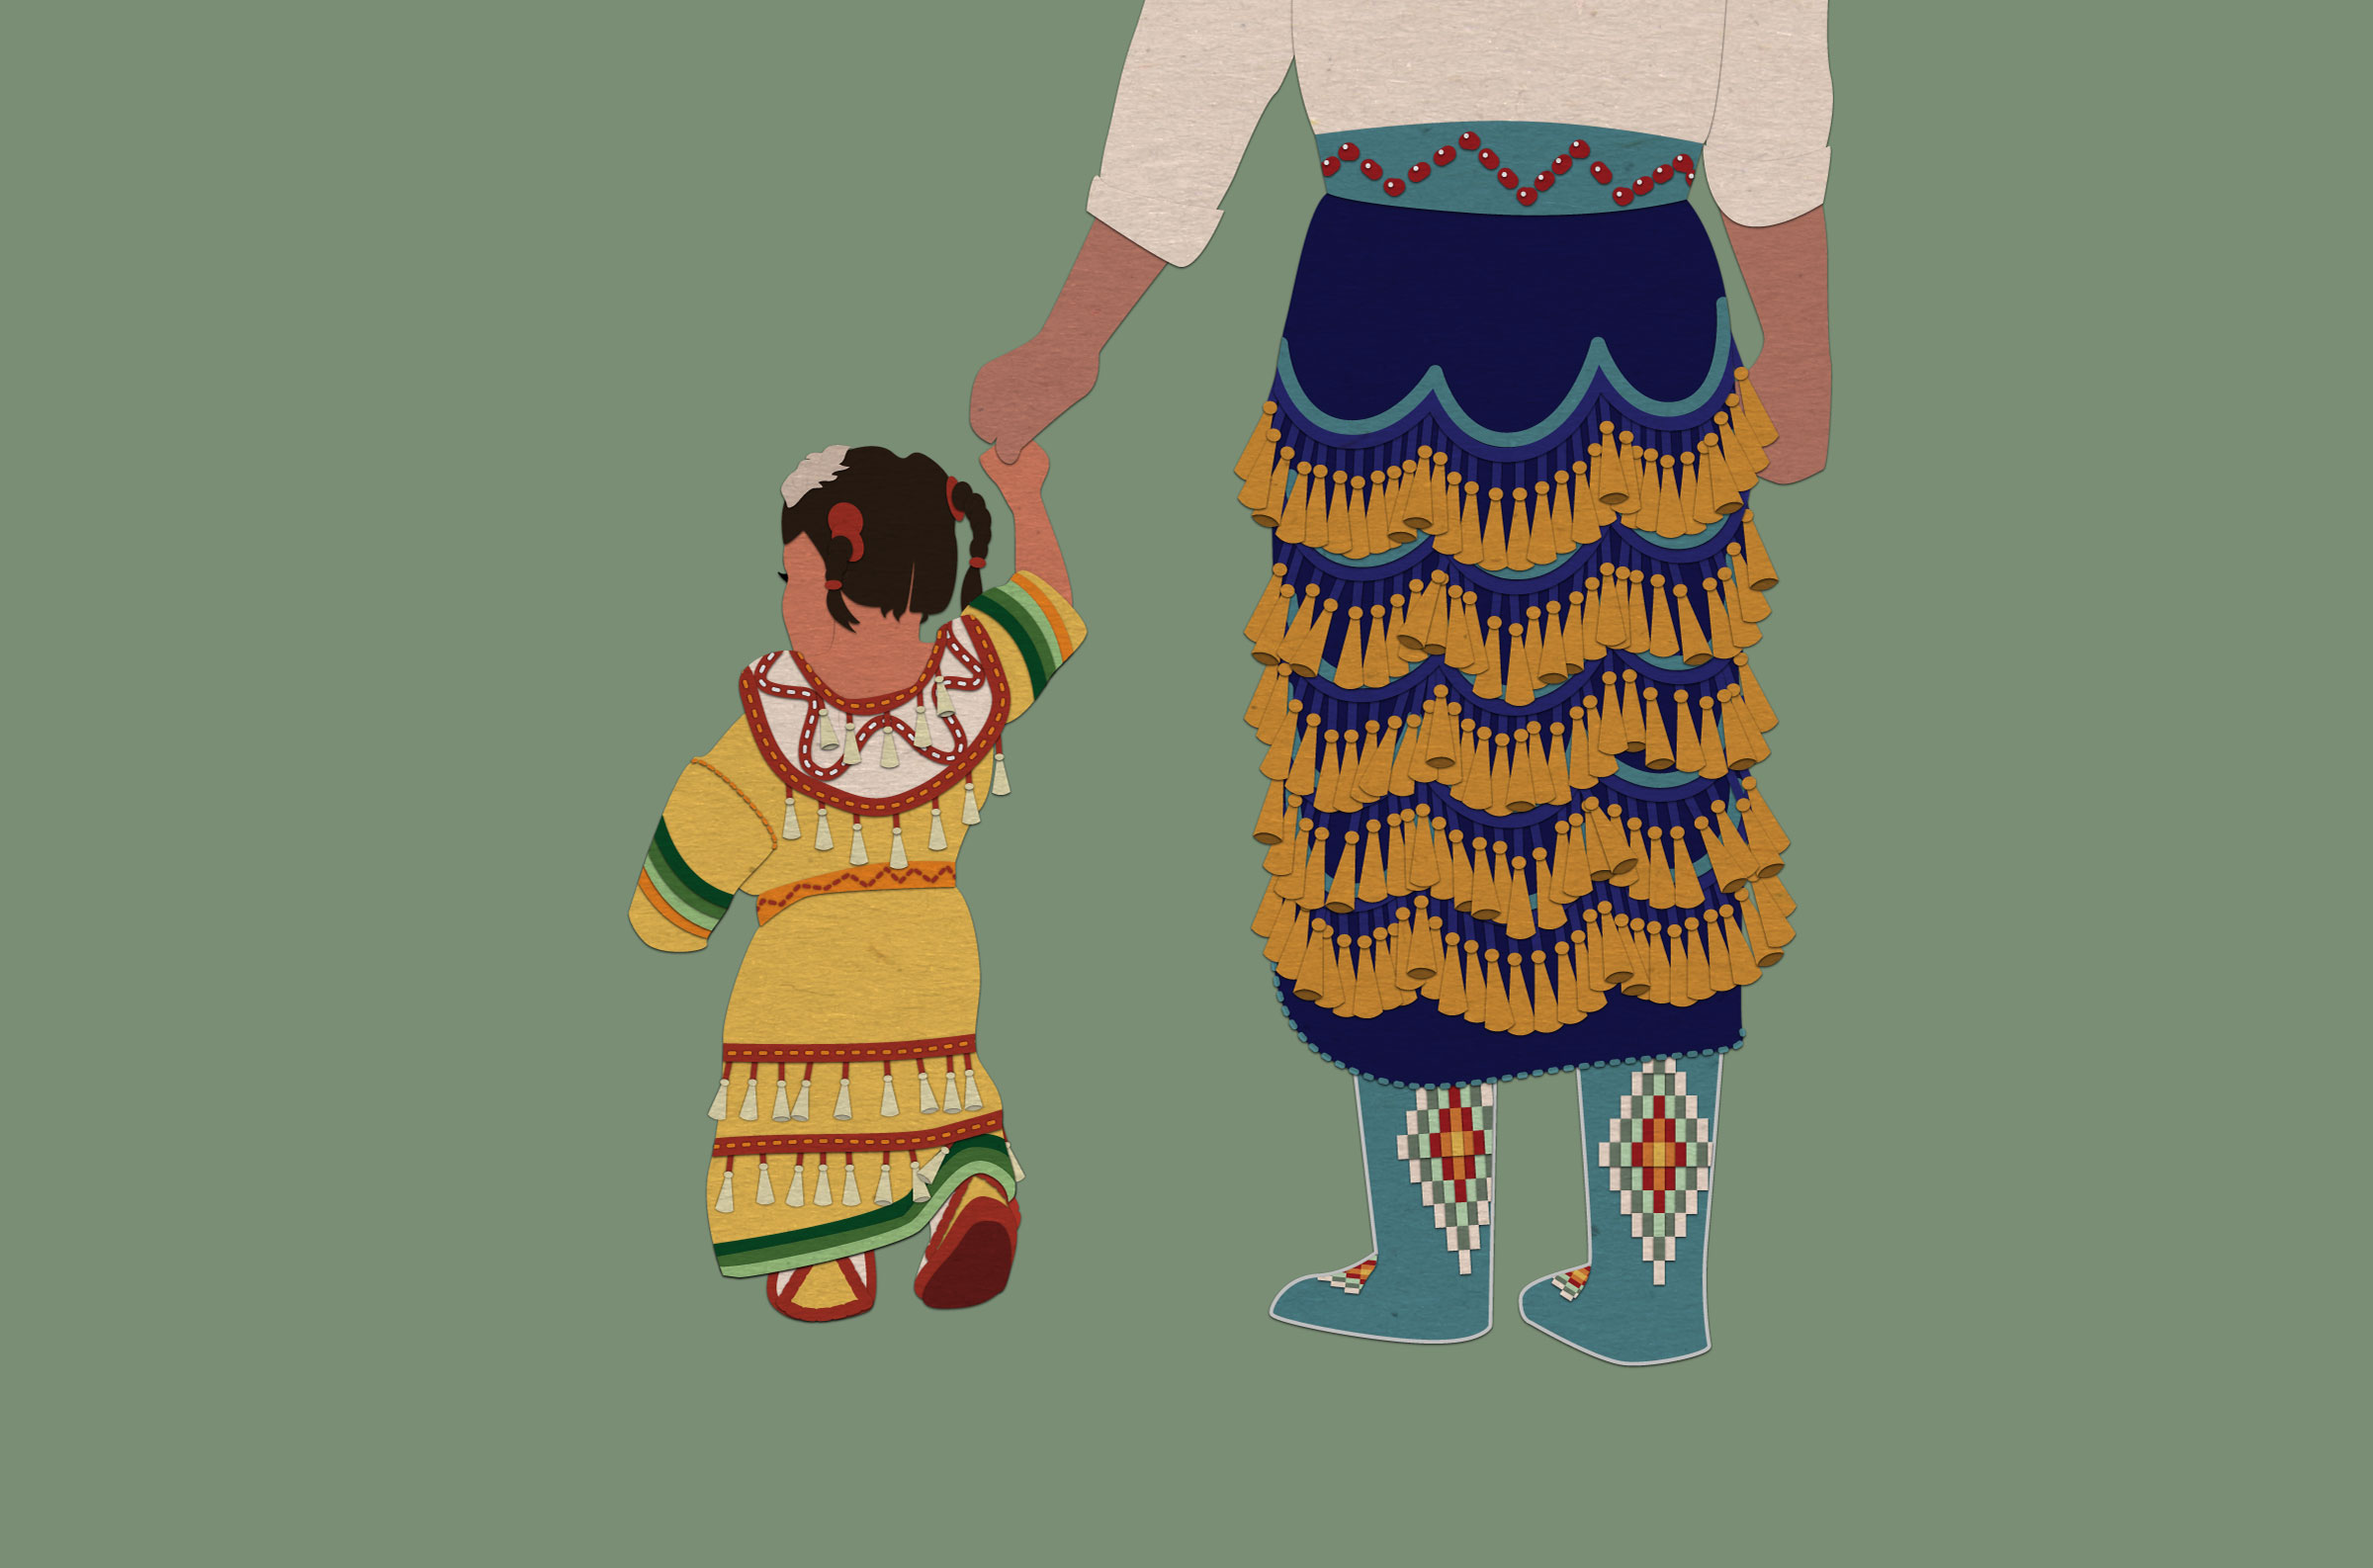 cut and arranged paper to resemble a young child wearing a jingle dress and holding the hand of an adult also wearing a jingle dress